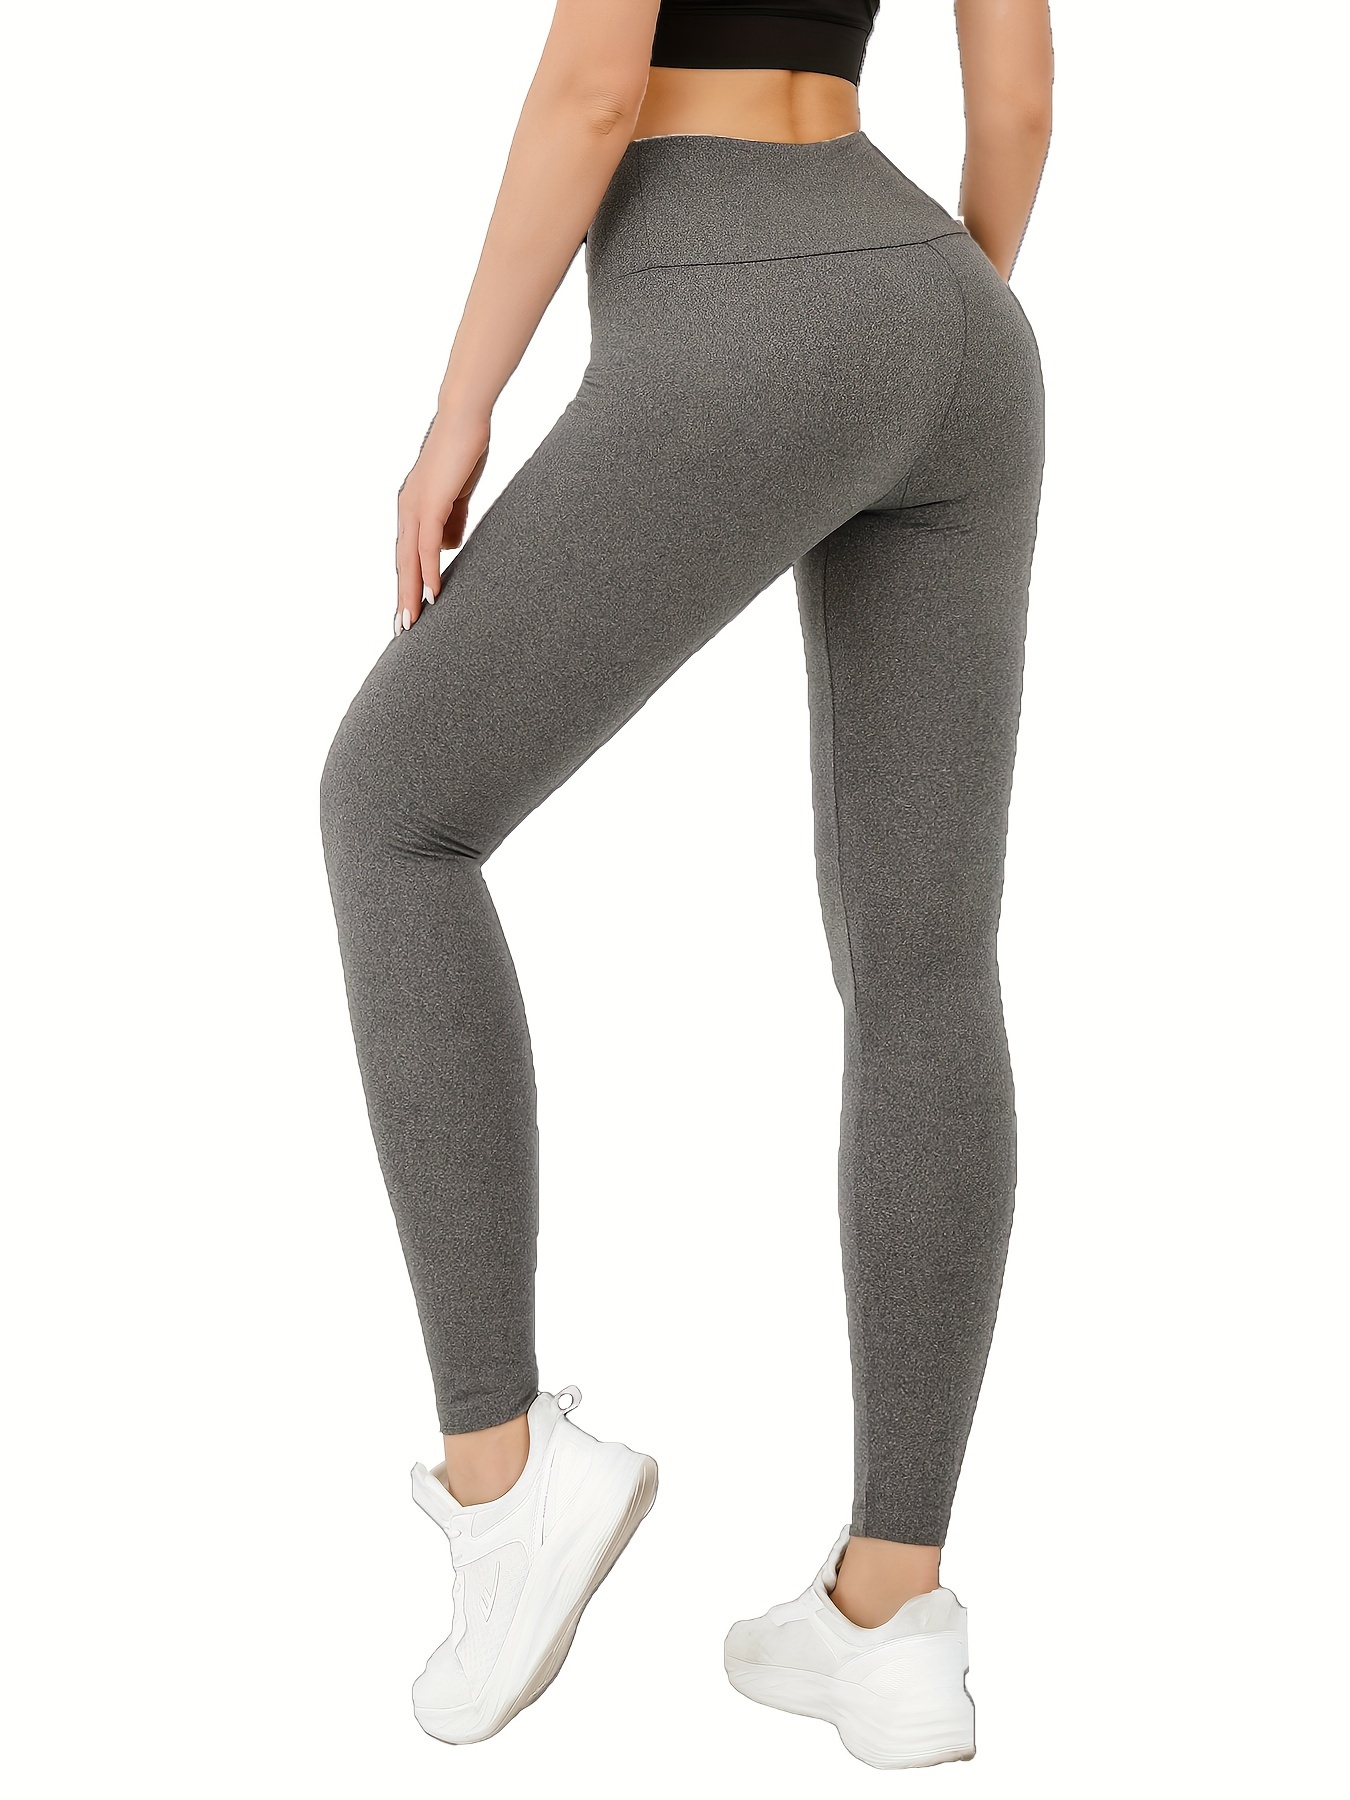 Women High Waisted Yoga Pants For Exercise Workout Soft Leggings